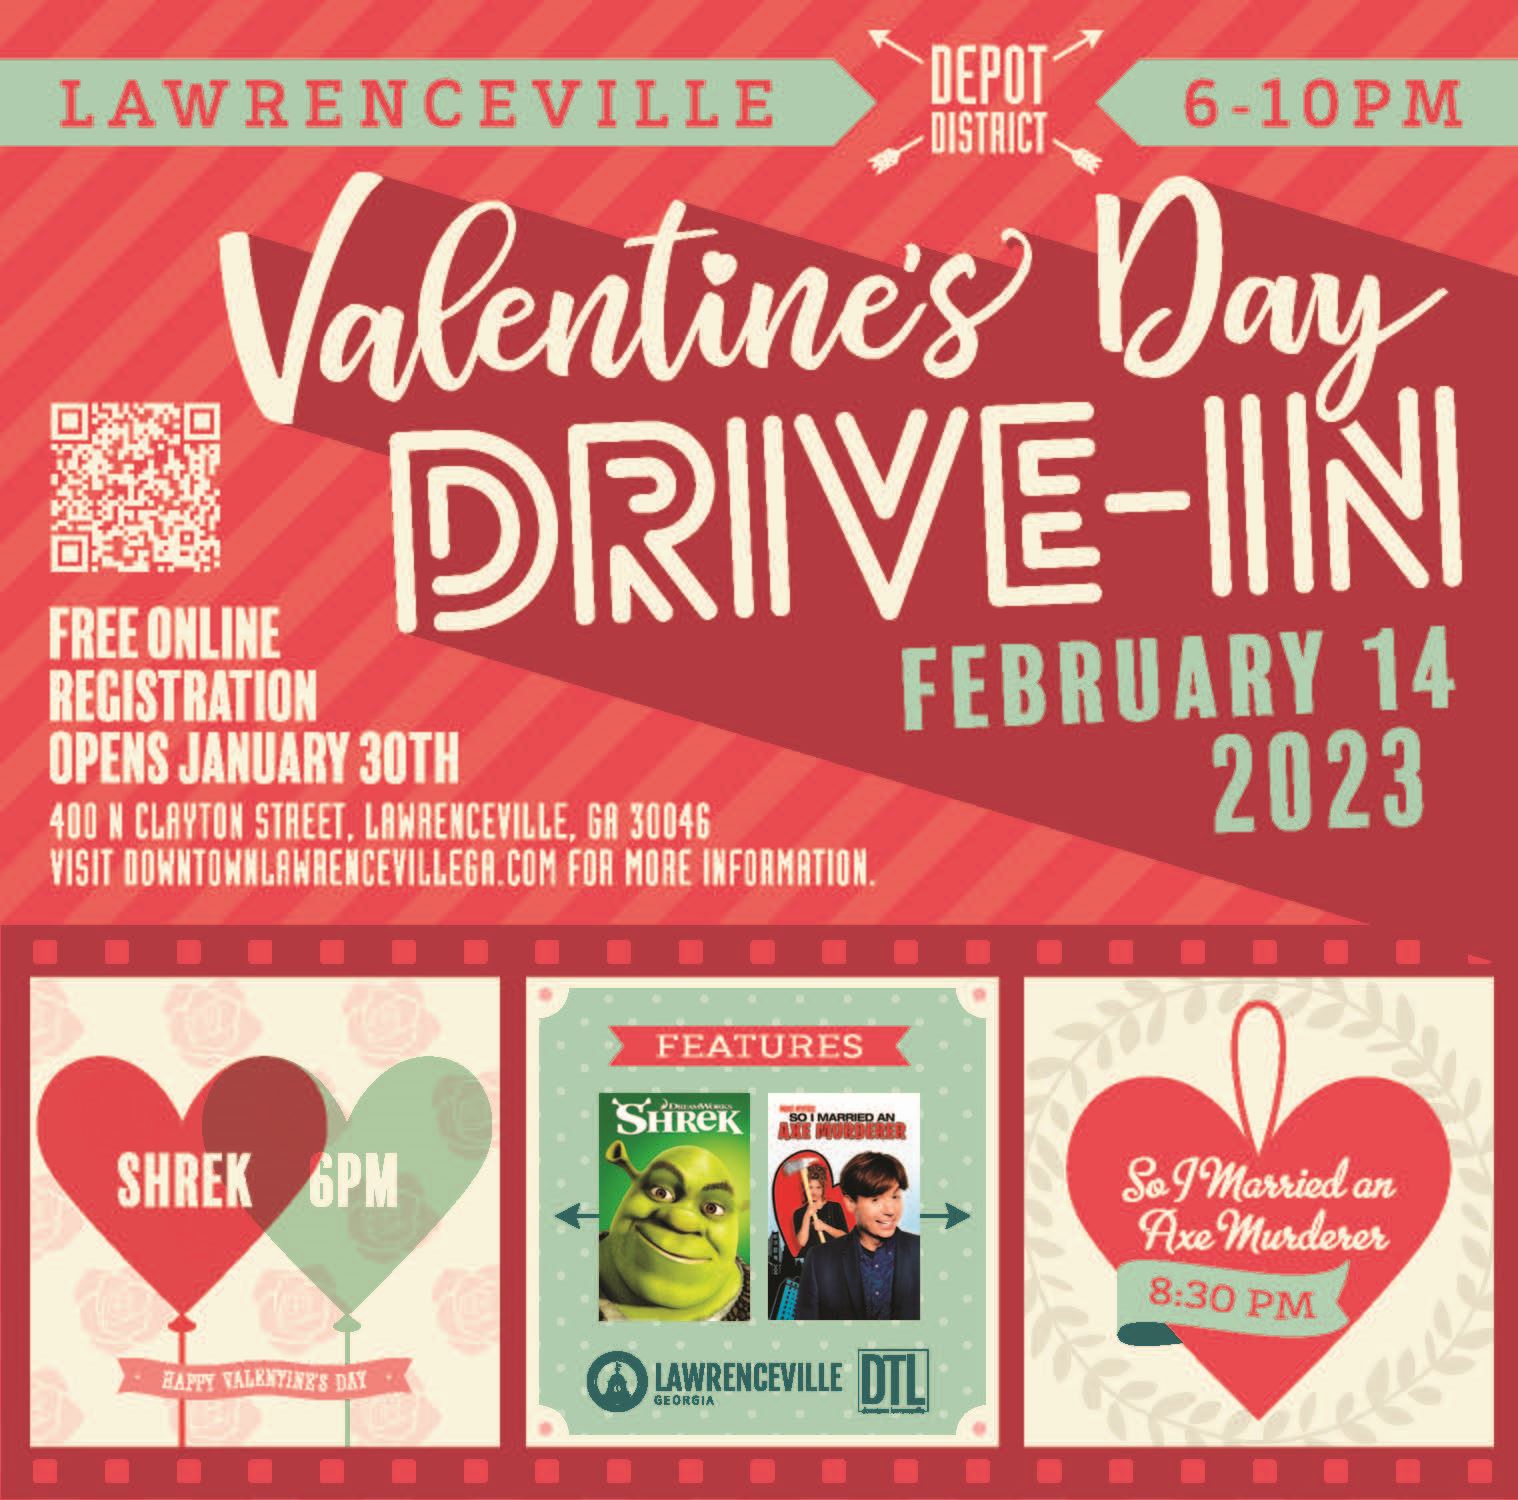 Valentines-drive-in